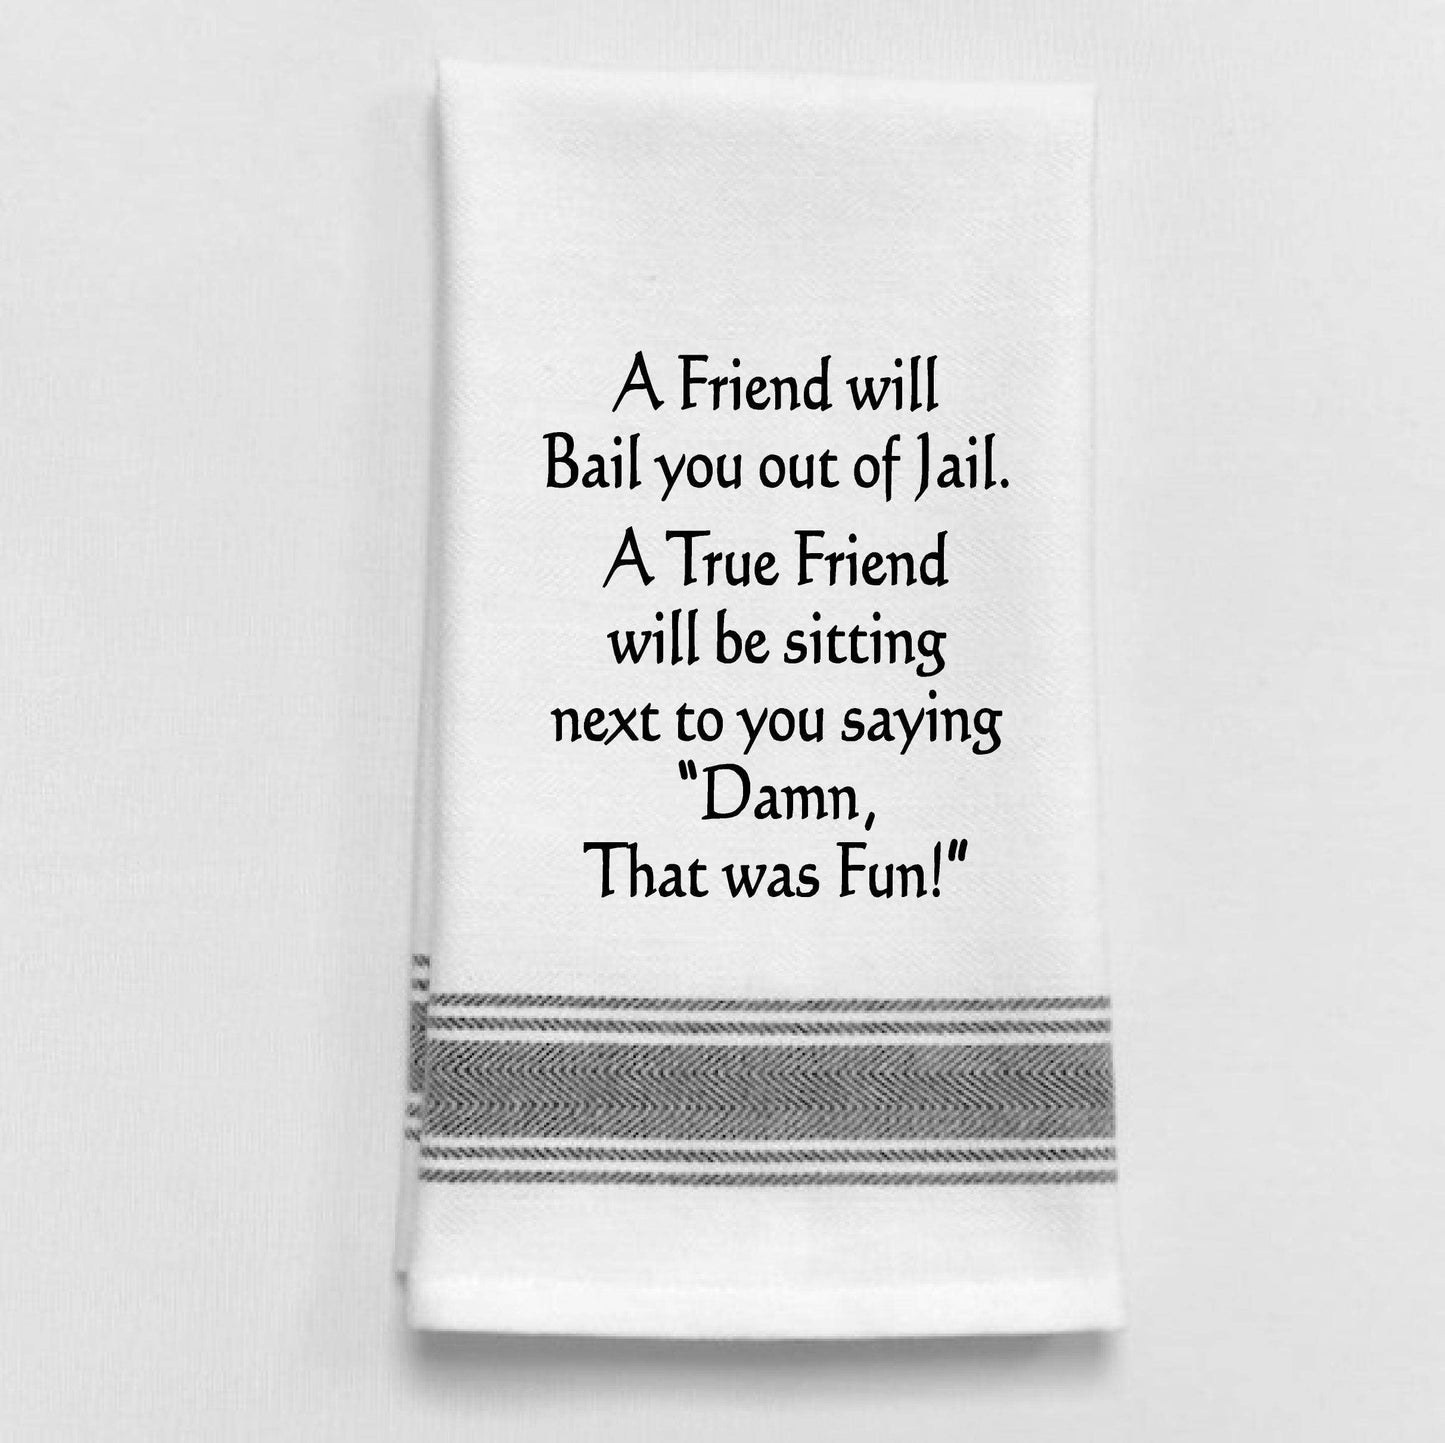 A friend will bail you out of jail. A true...